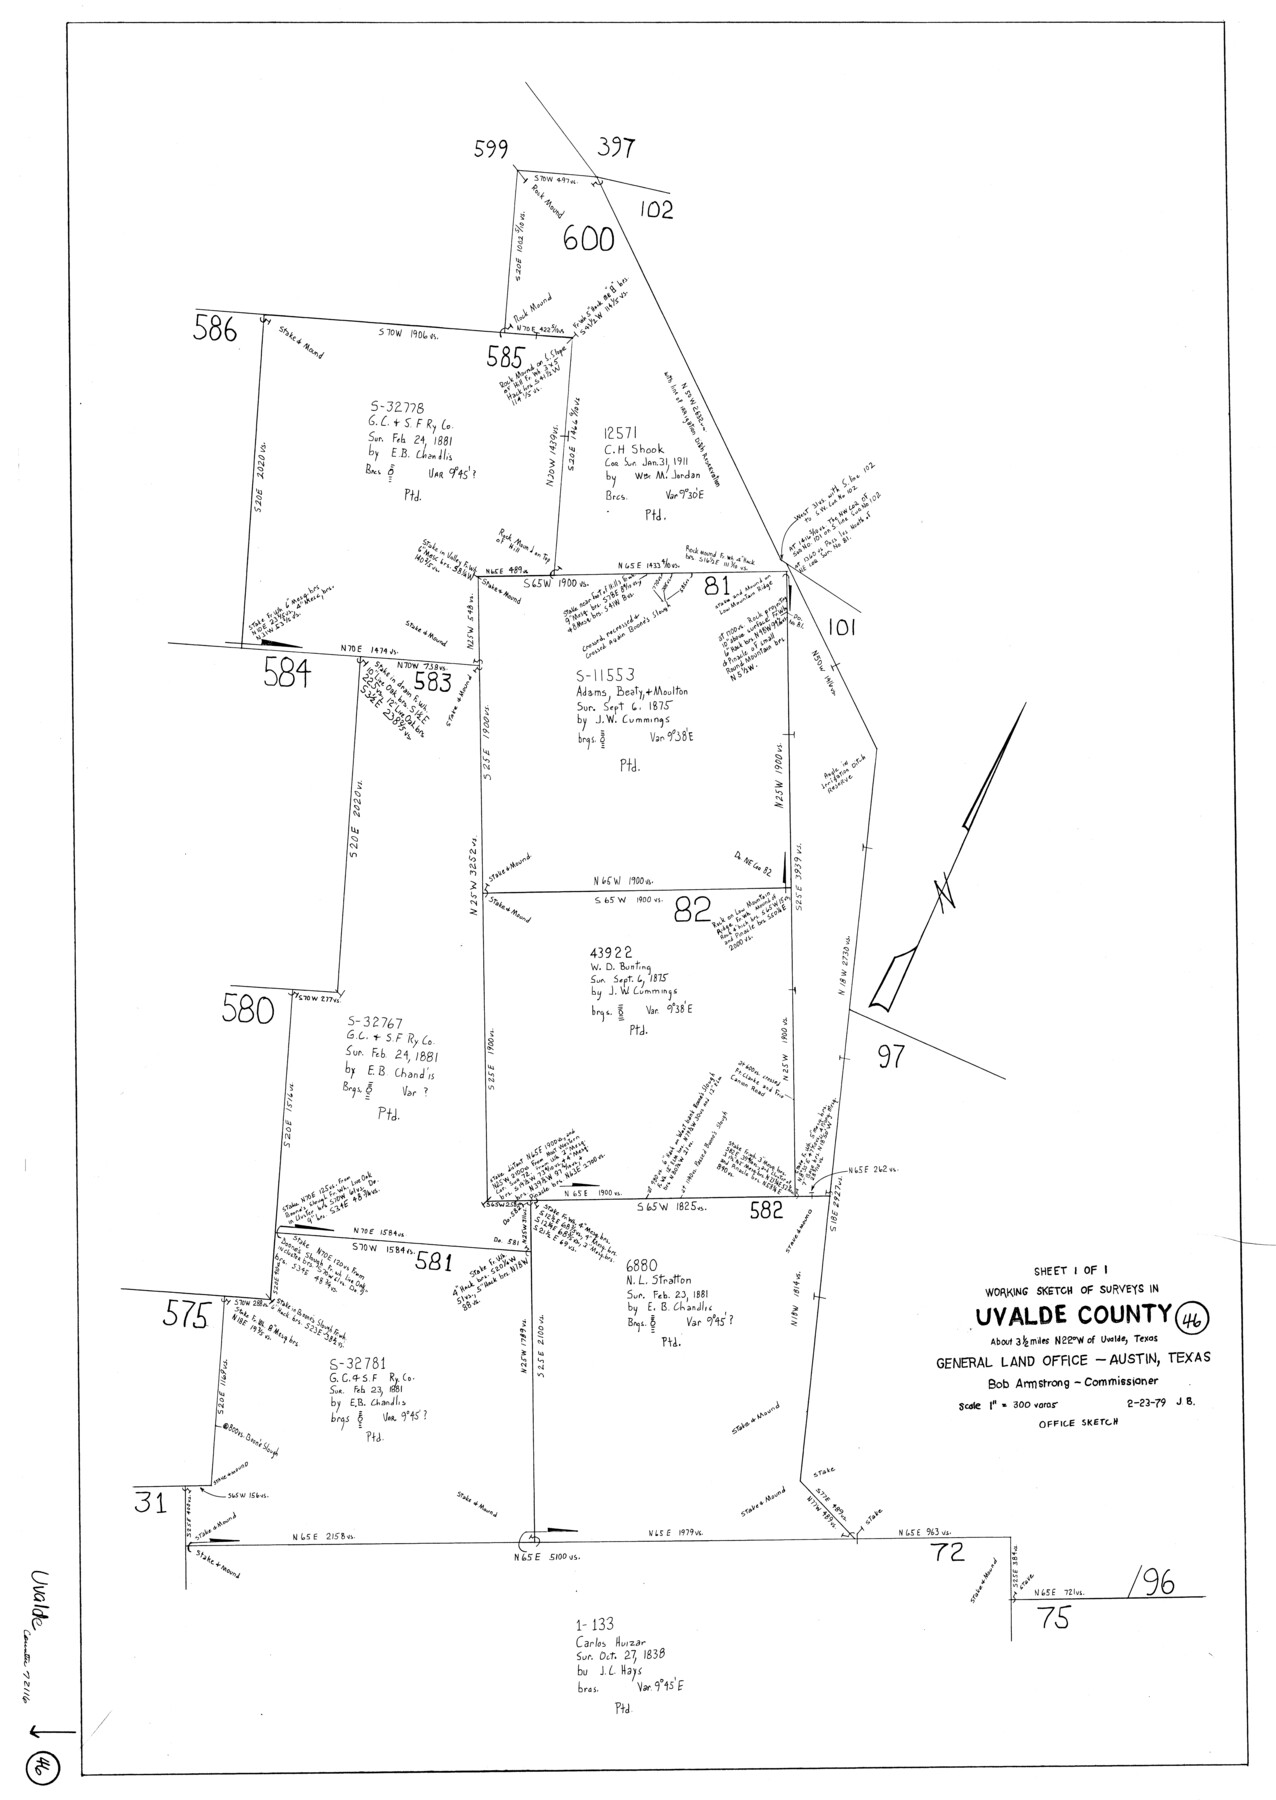 72116, Uvalde County Working Sketch 46, General Map Collection